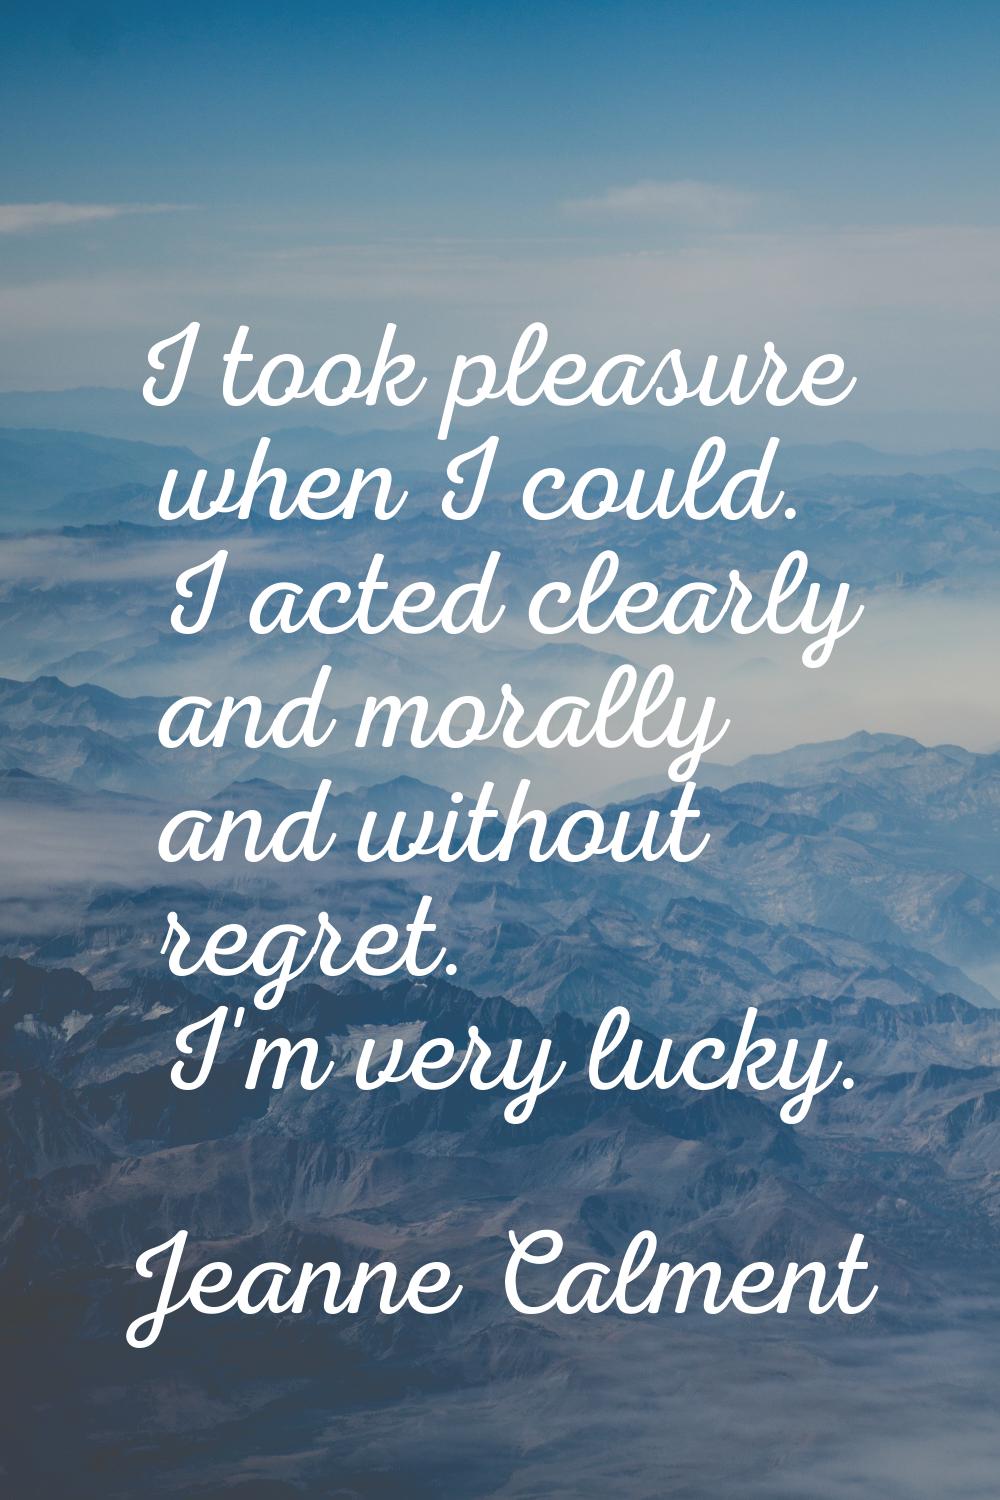 I took pleasure when I could. I acted clearly and morally and without regret. I'm very lucky.